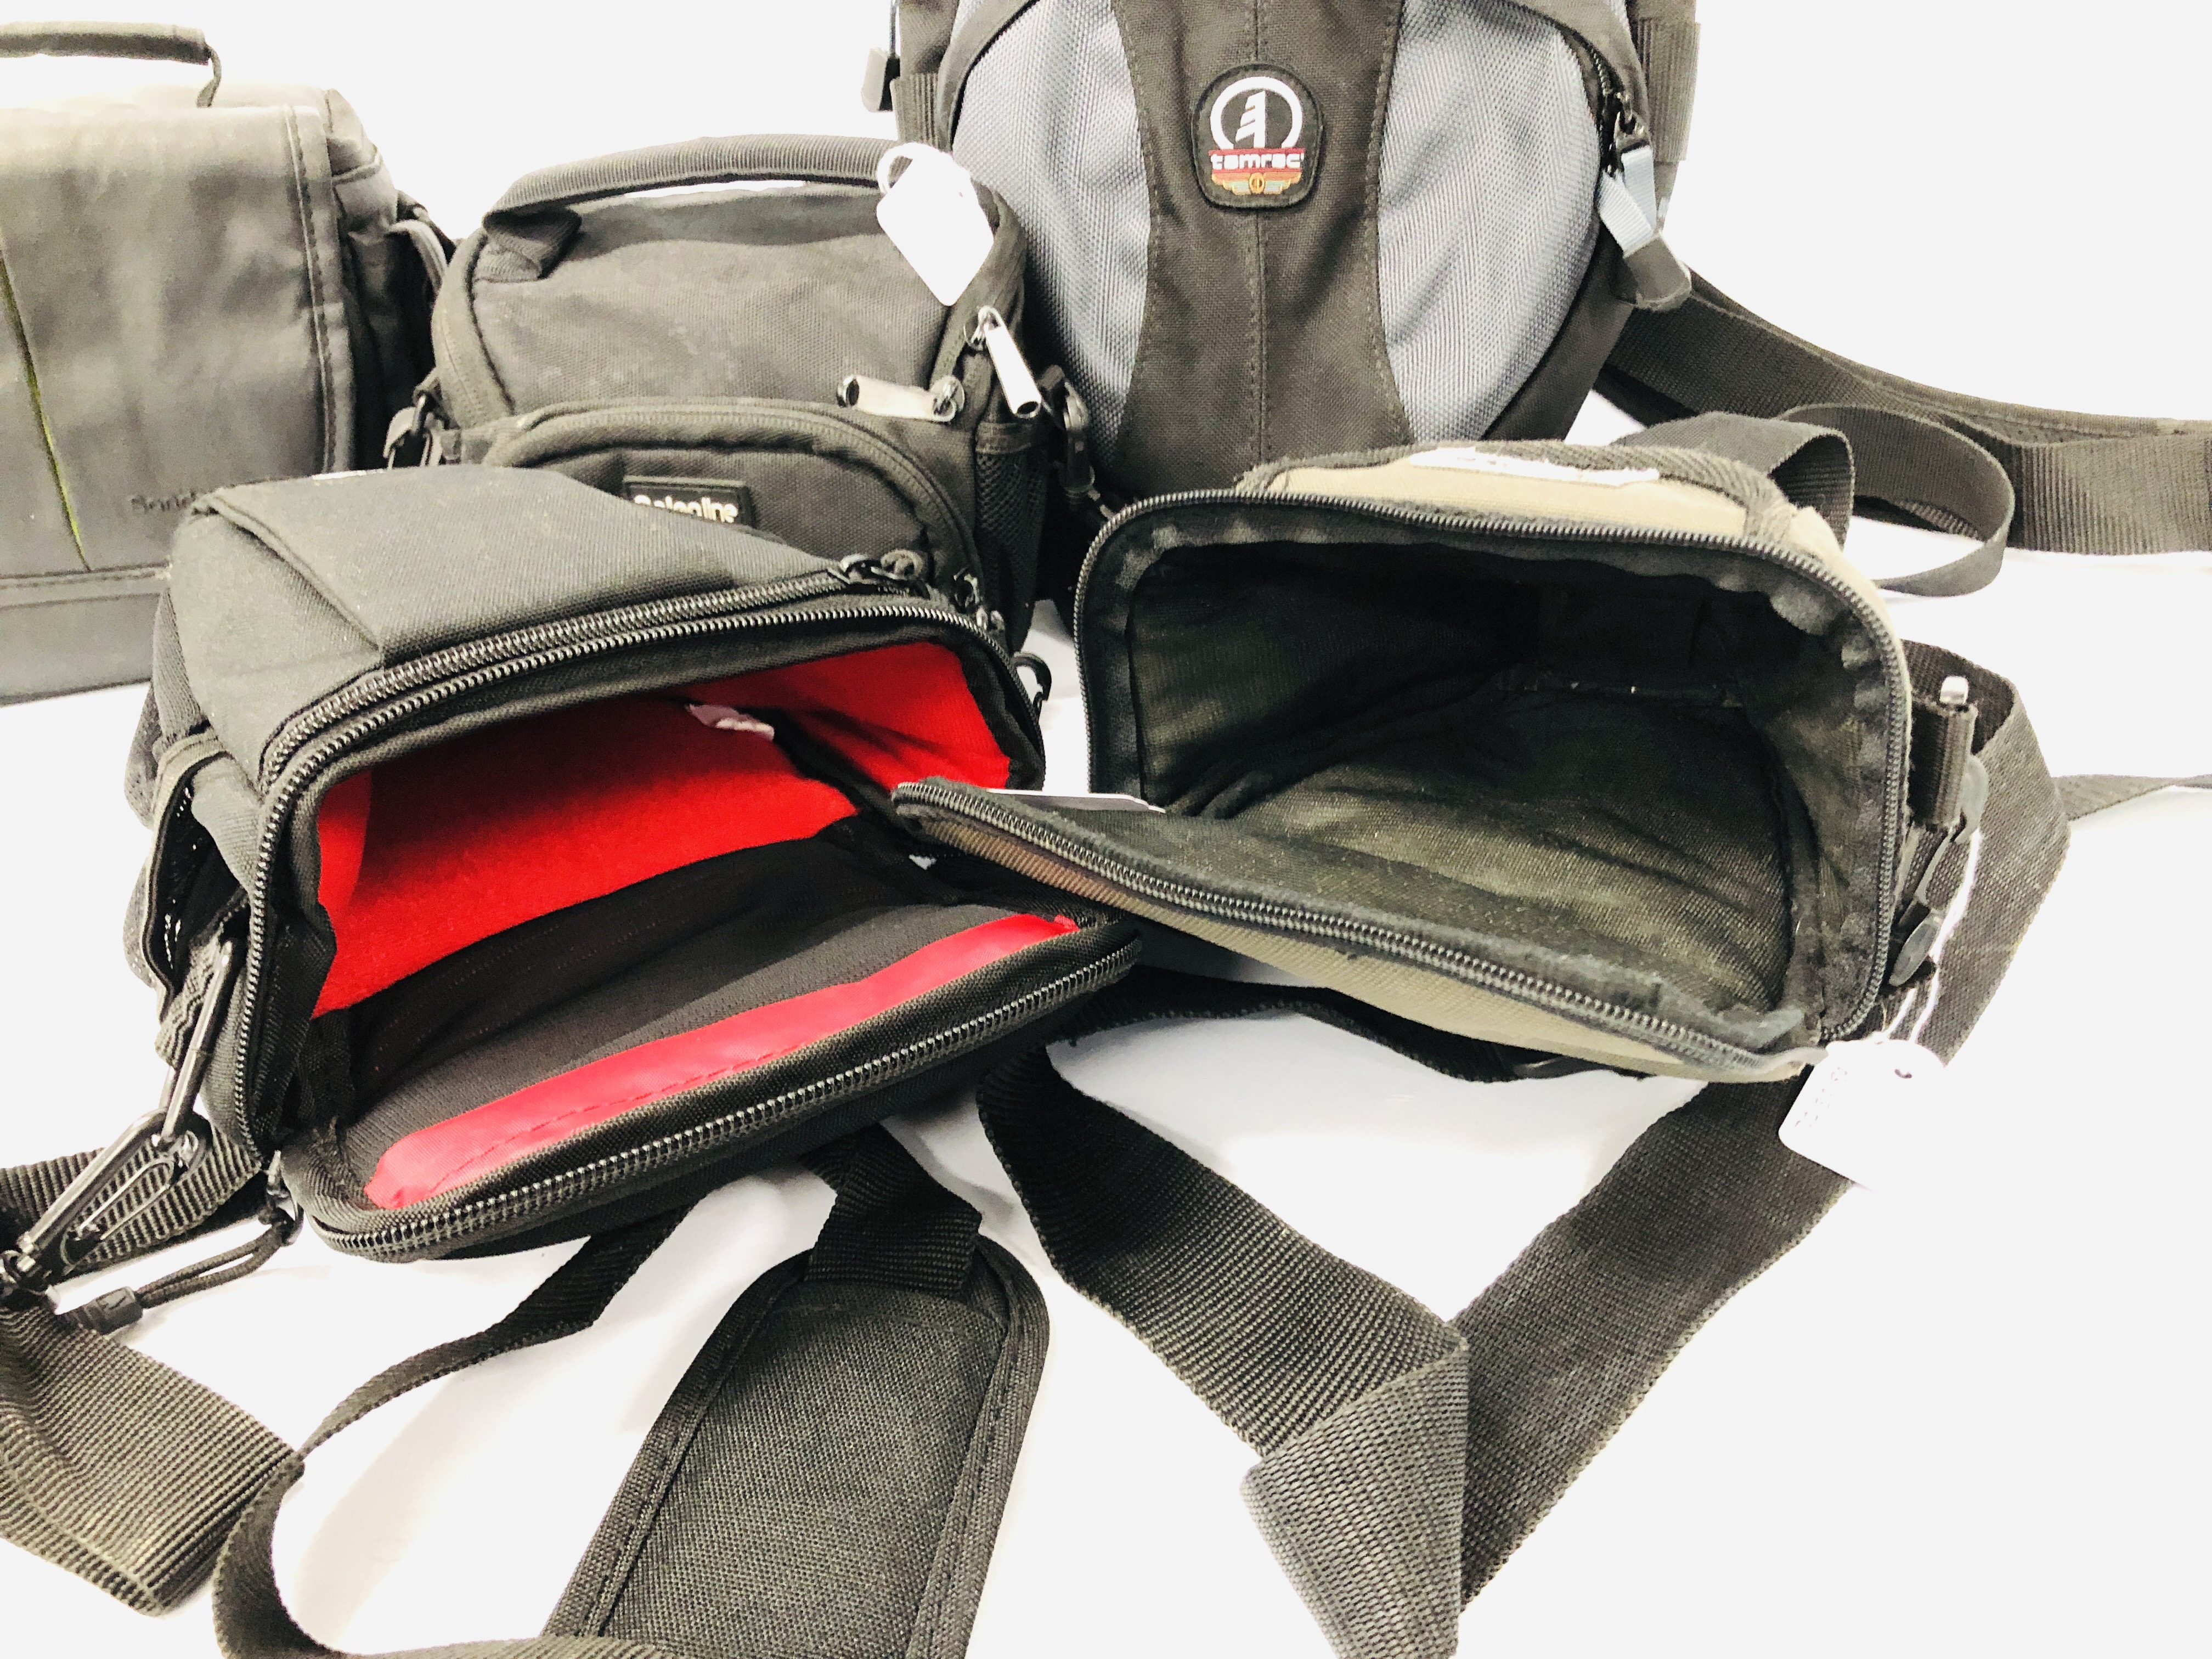 5 X VARIOUS PADDED CAMERA BAGS TO INCLUDE SANDSTORM, TAMRAC, SELECLINE, ETC. - Image 2 of 5